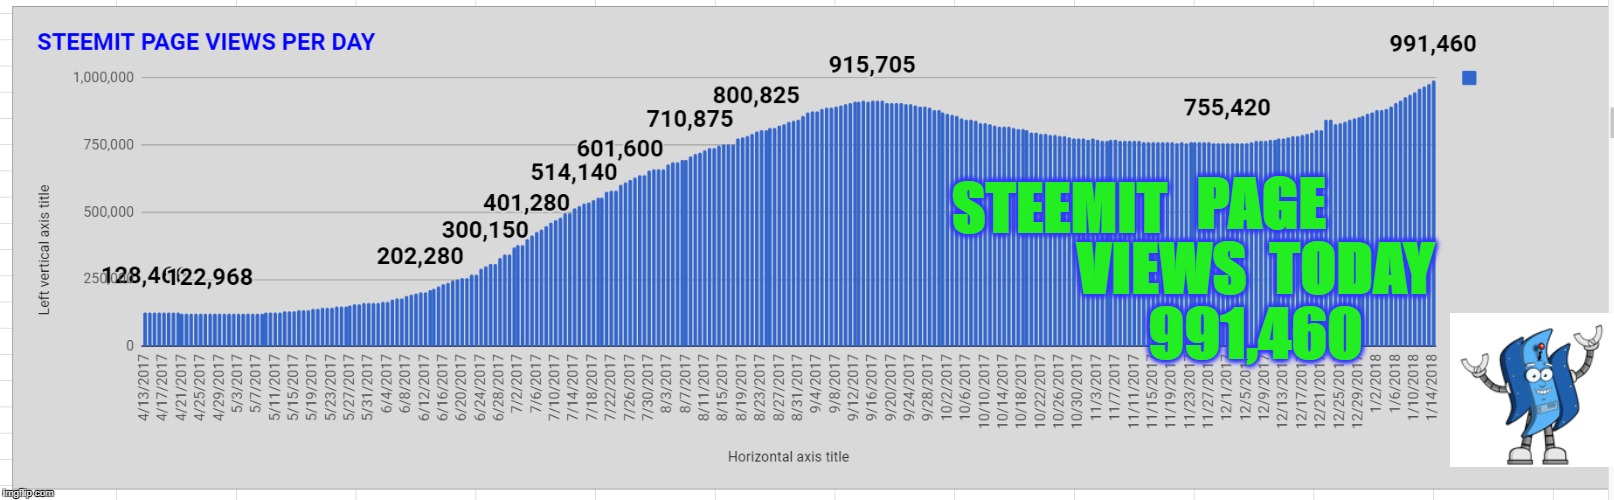 STEEMIT; PAGE  VIEWS  TODAY  991,460 | made w/ Imgflip meme maker